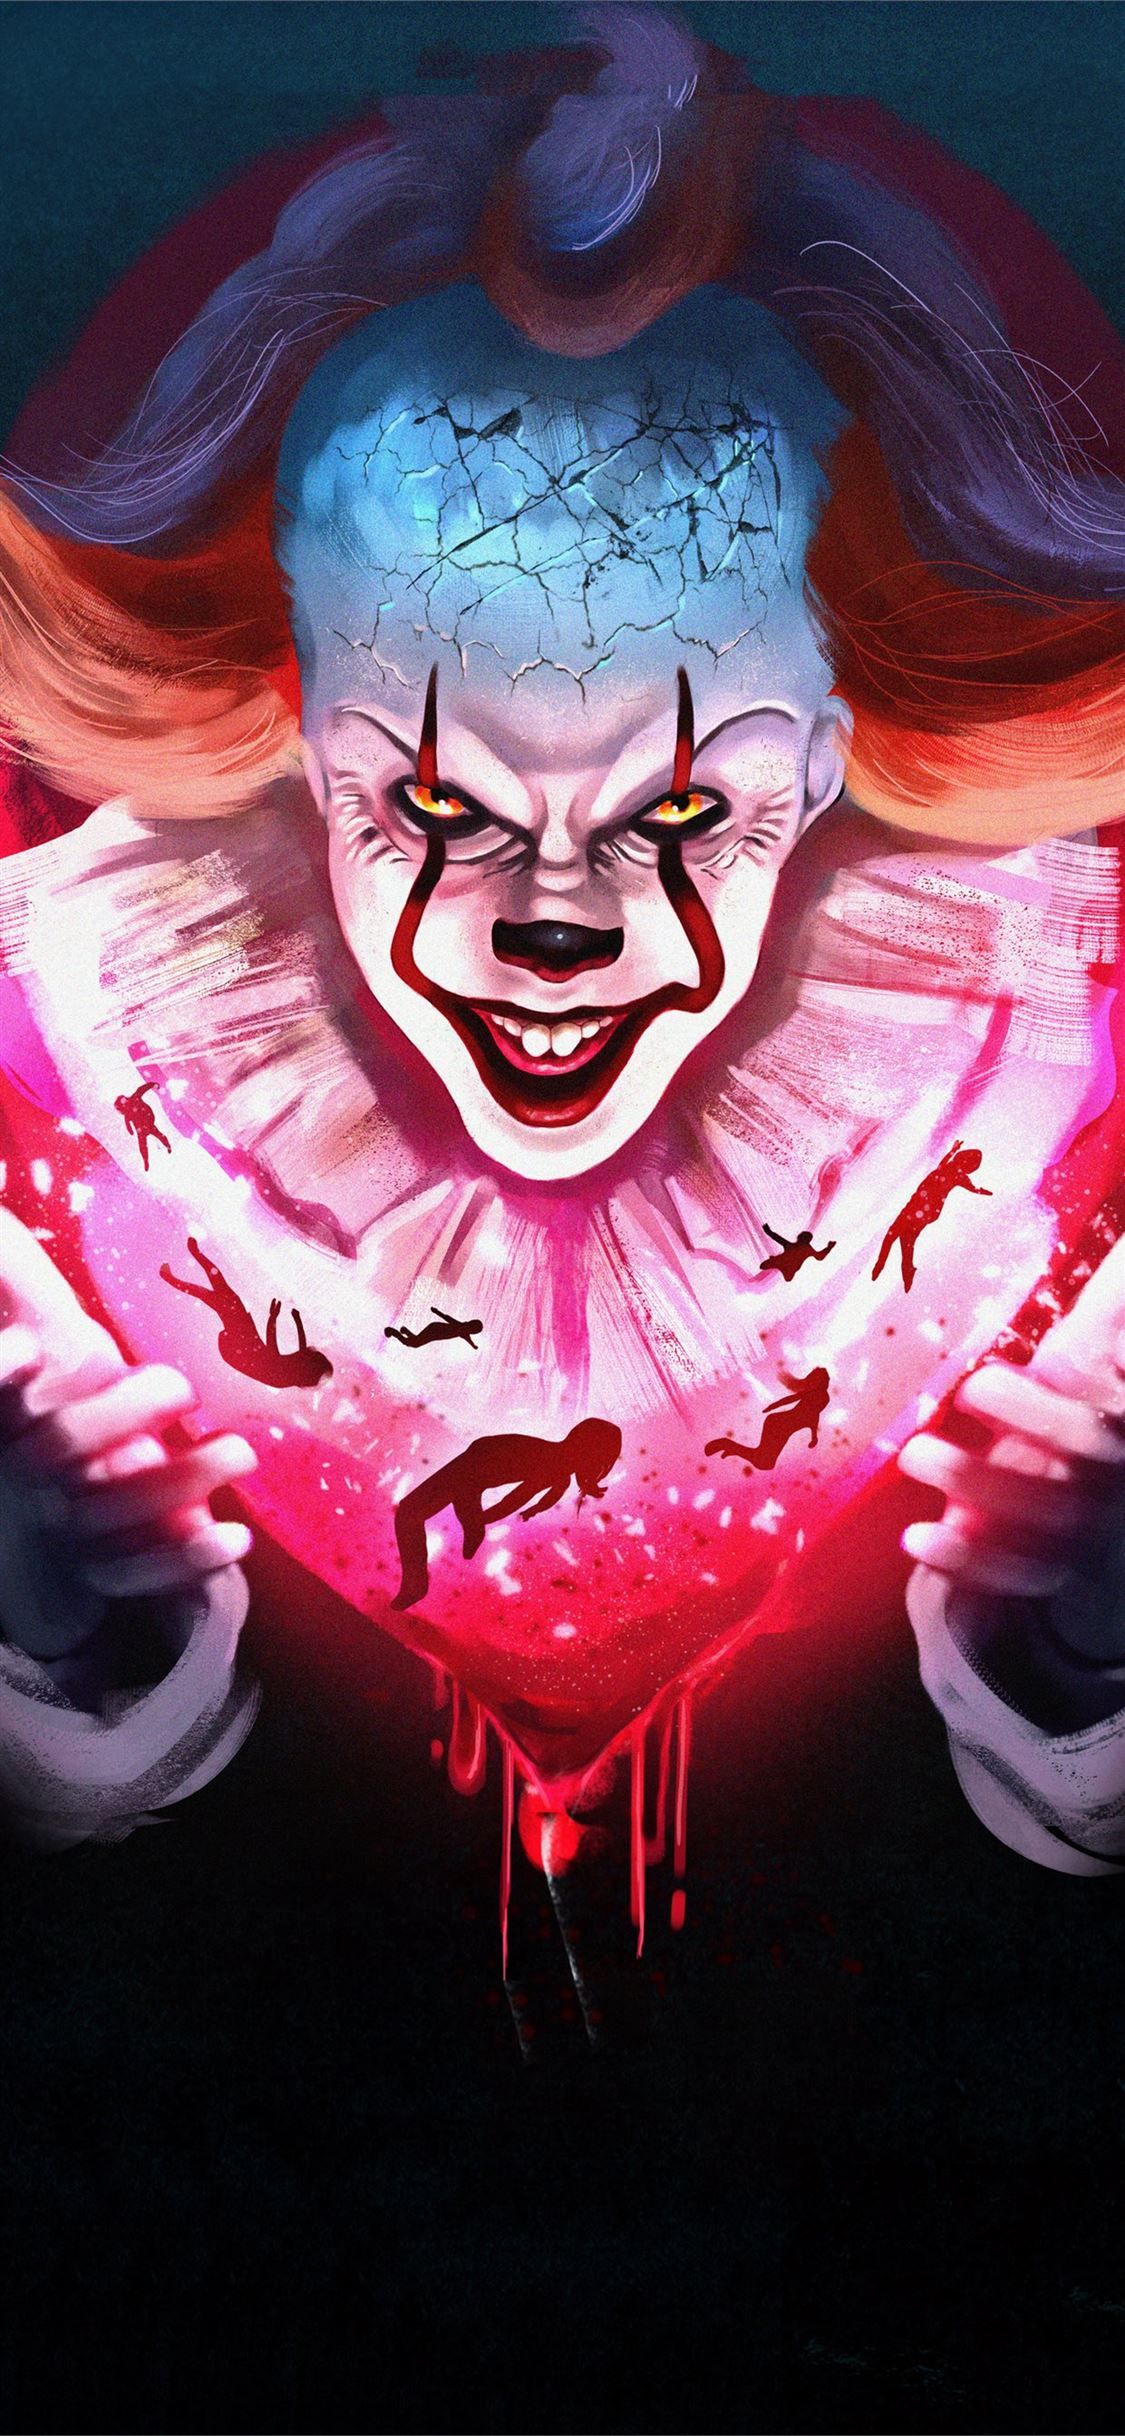 pennywise newart iPhone 11 Wallpaper Free Download